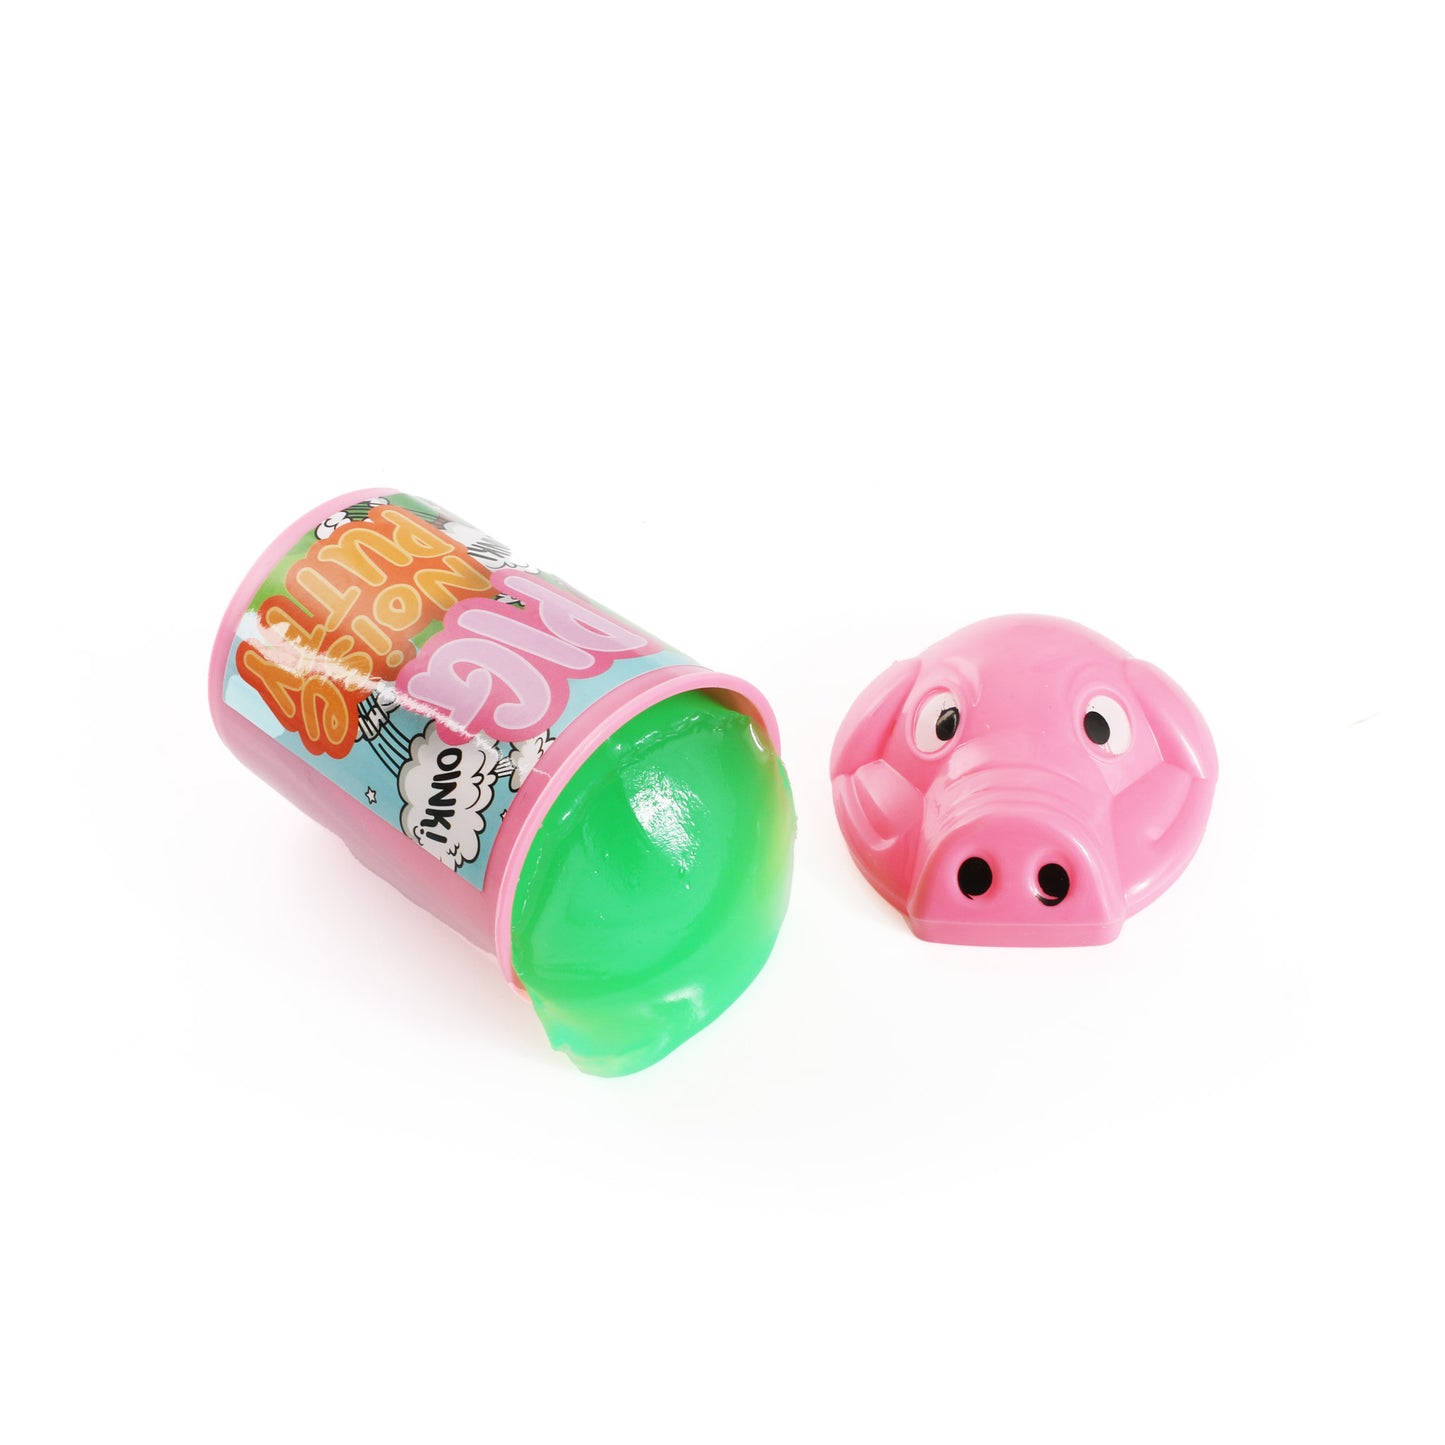 PIG NOISE PUTTY. SIZE OF TUB IS 8x5.5cm